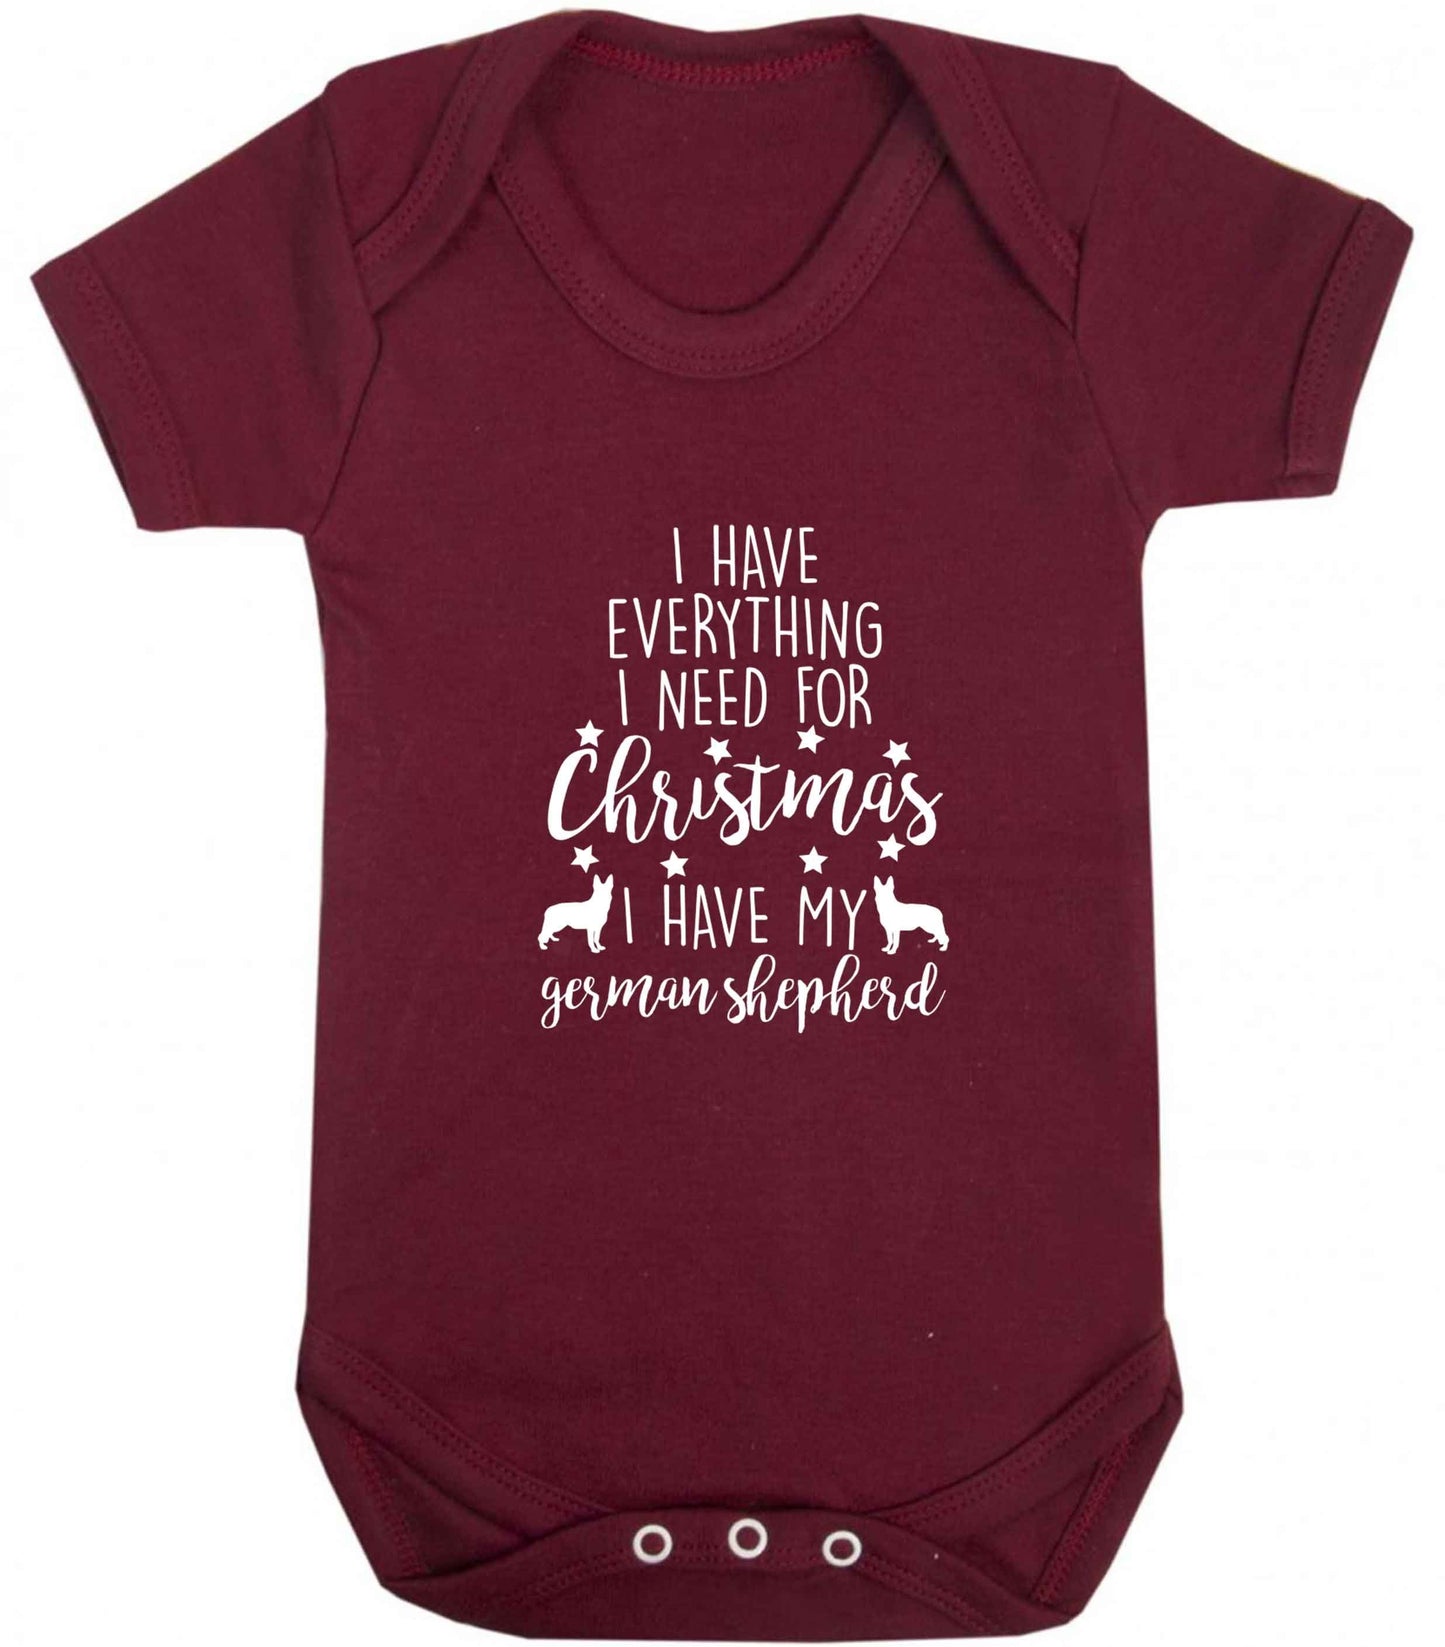 I have everything I need for Christmas I have my german shepherd baby vest maroon 18-24 months